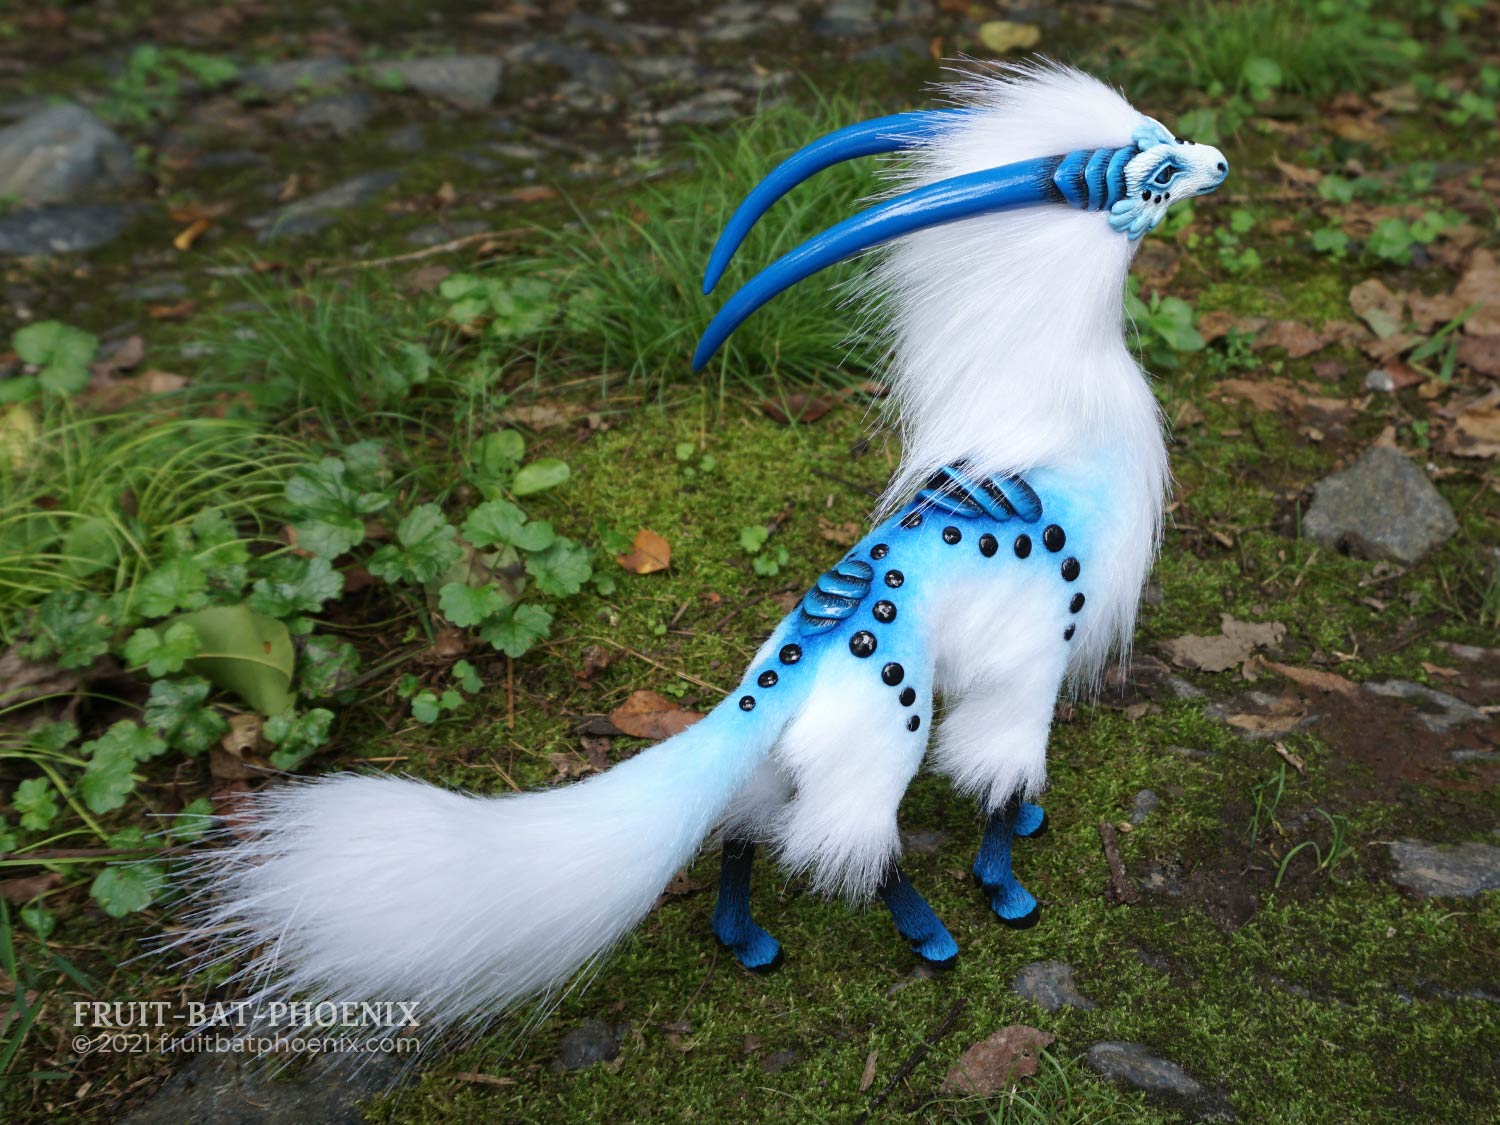 Cloud Antelope III, a blue and white creature with armored back plates